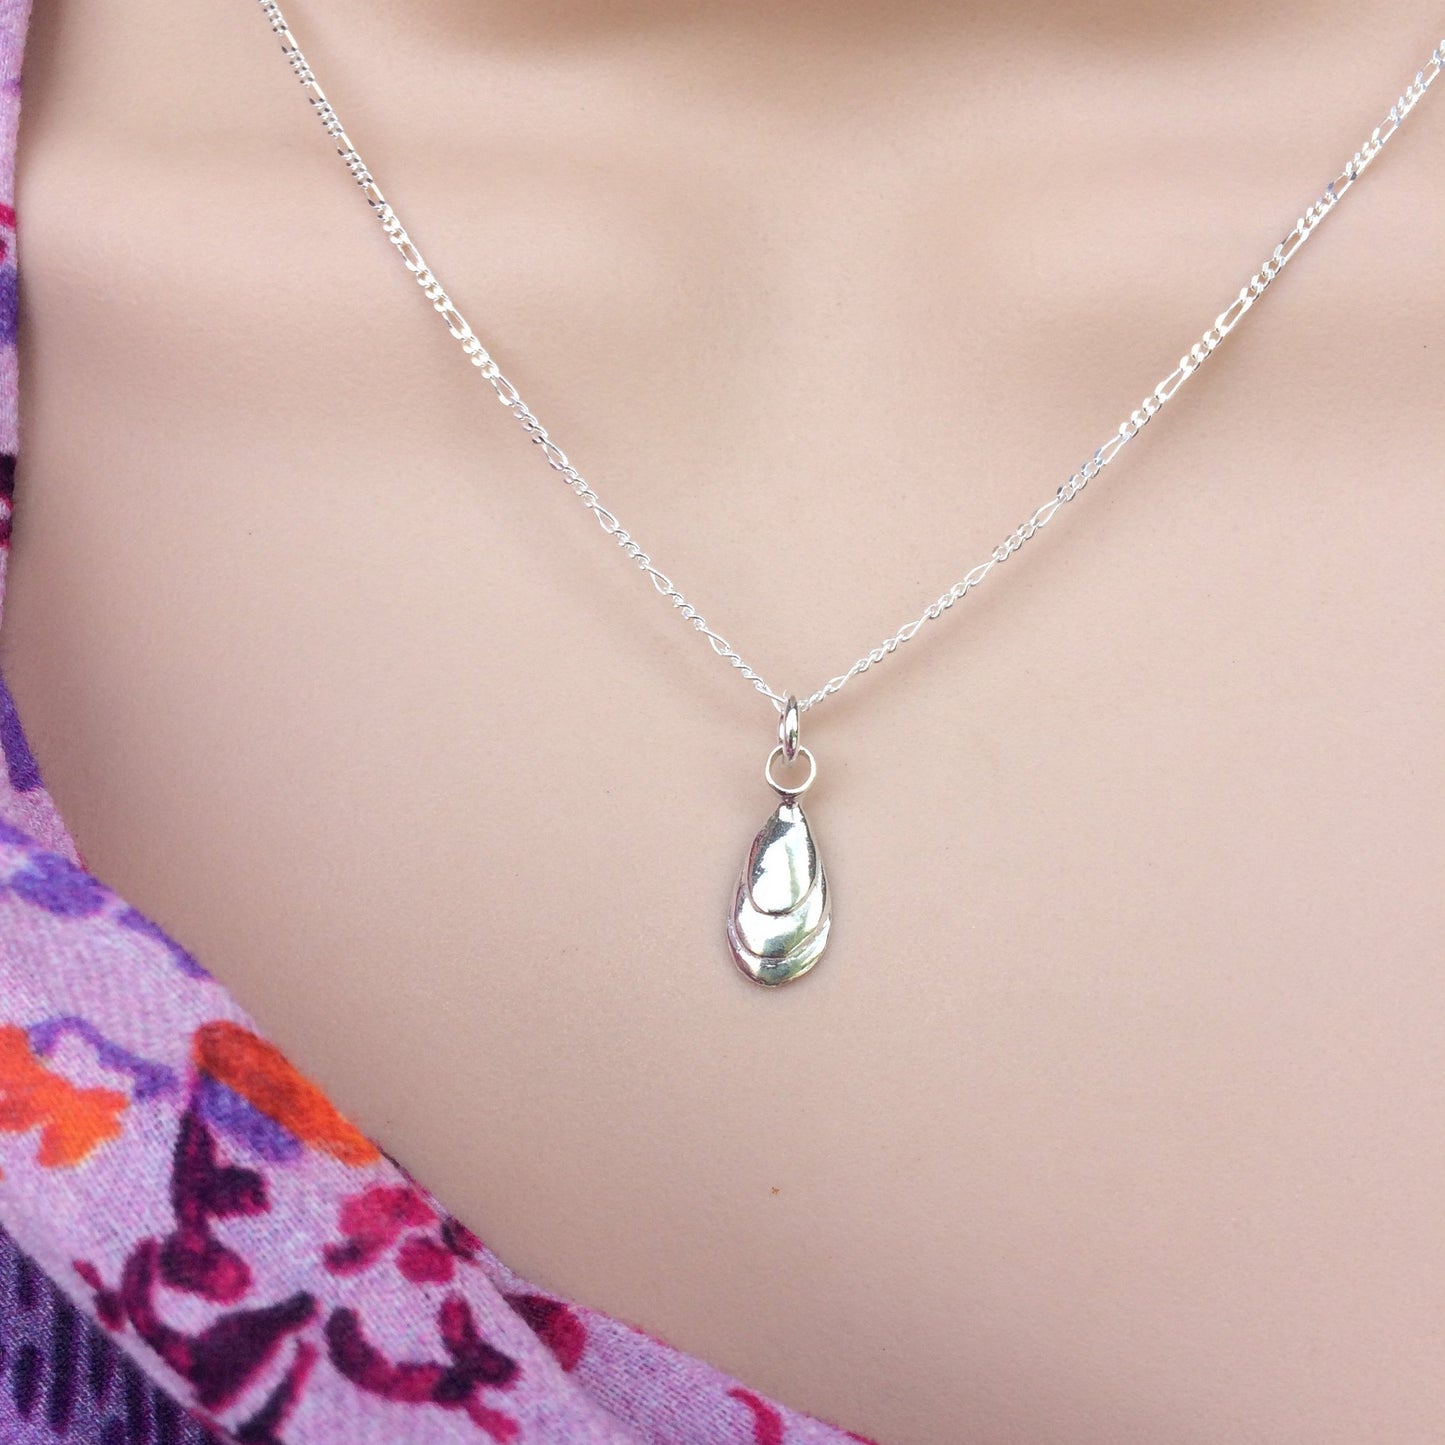 Baby silver mussel shell necklace